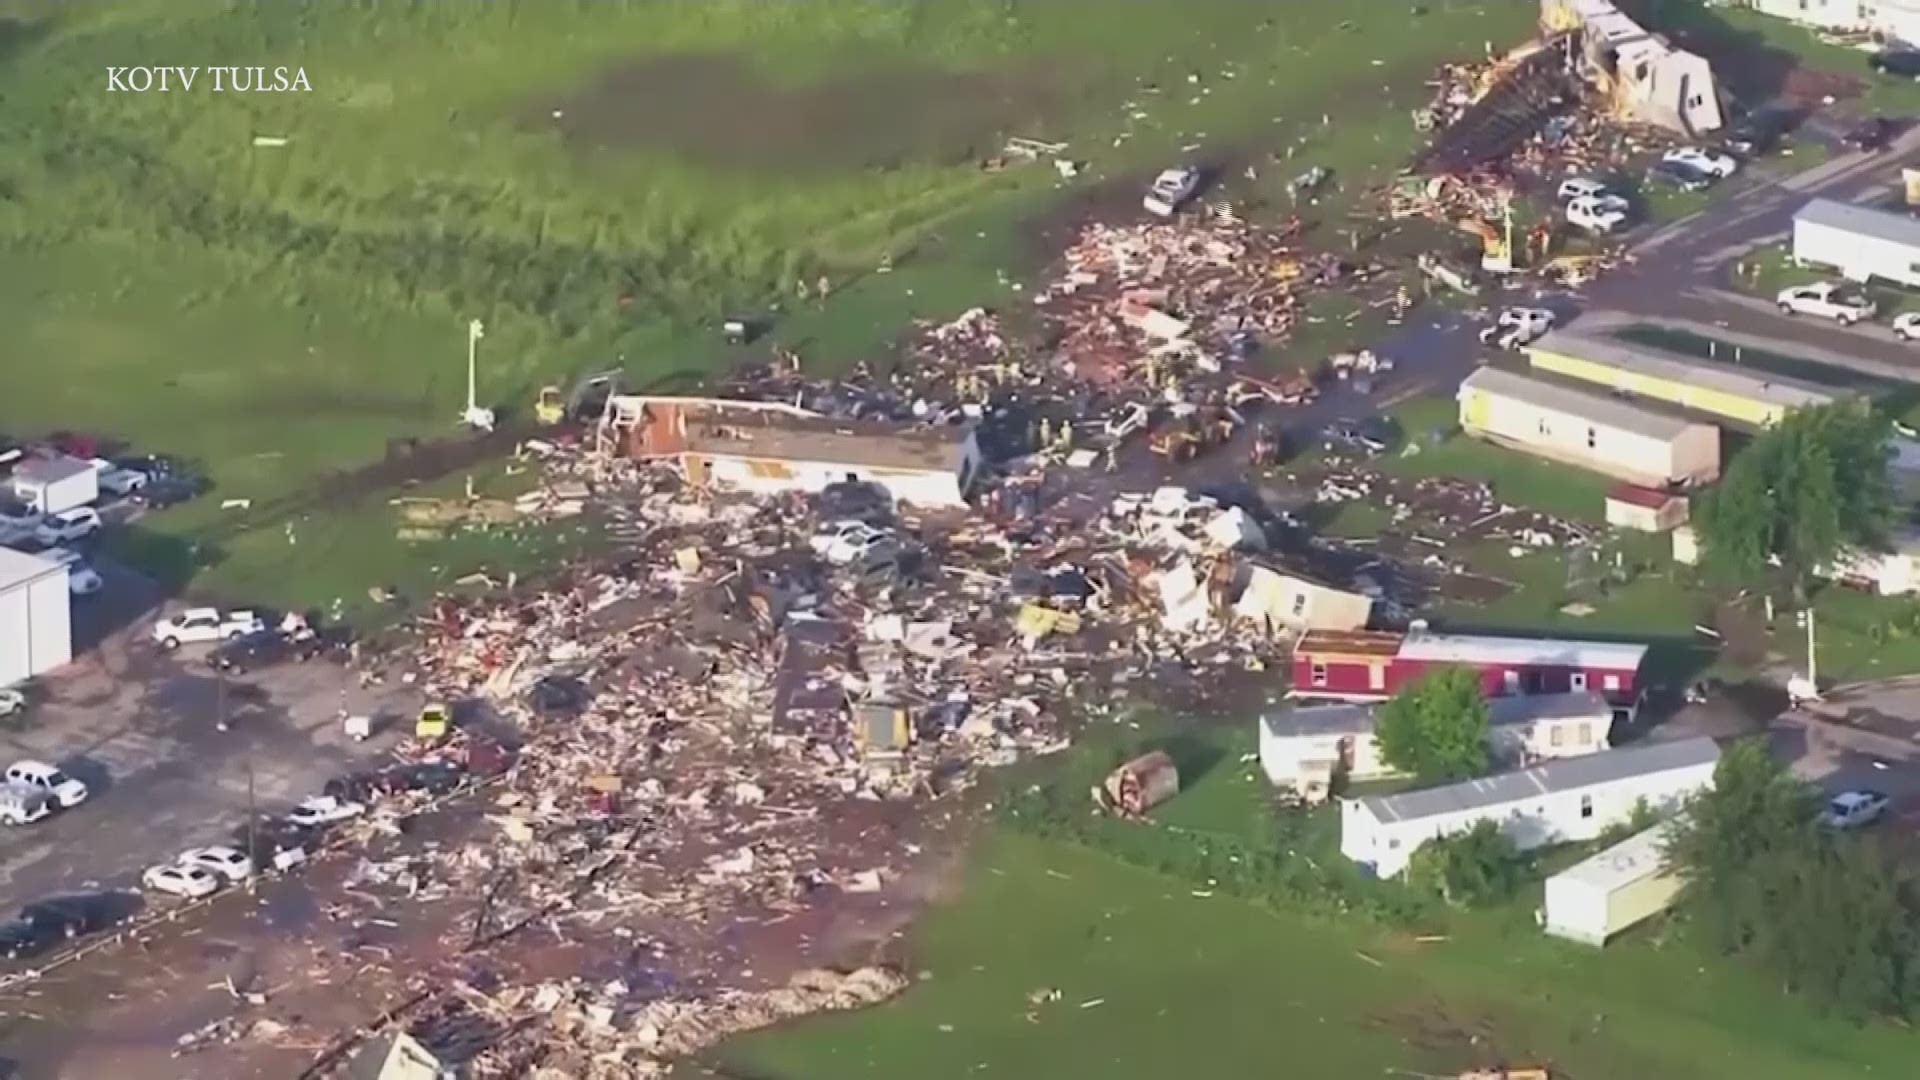 A tornado leveled a motel and tore through a mobile home park near Oklahoma City overnight, killing two people and injuring at least 29 others, authorities said Sunday.